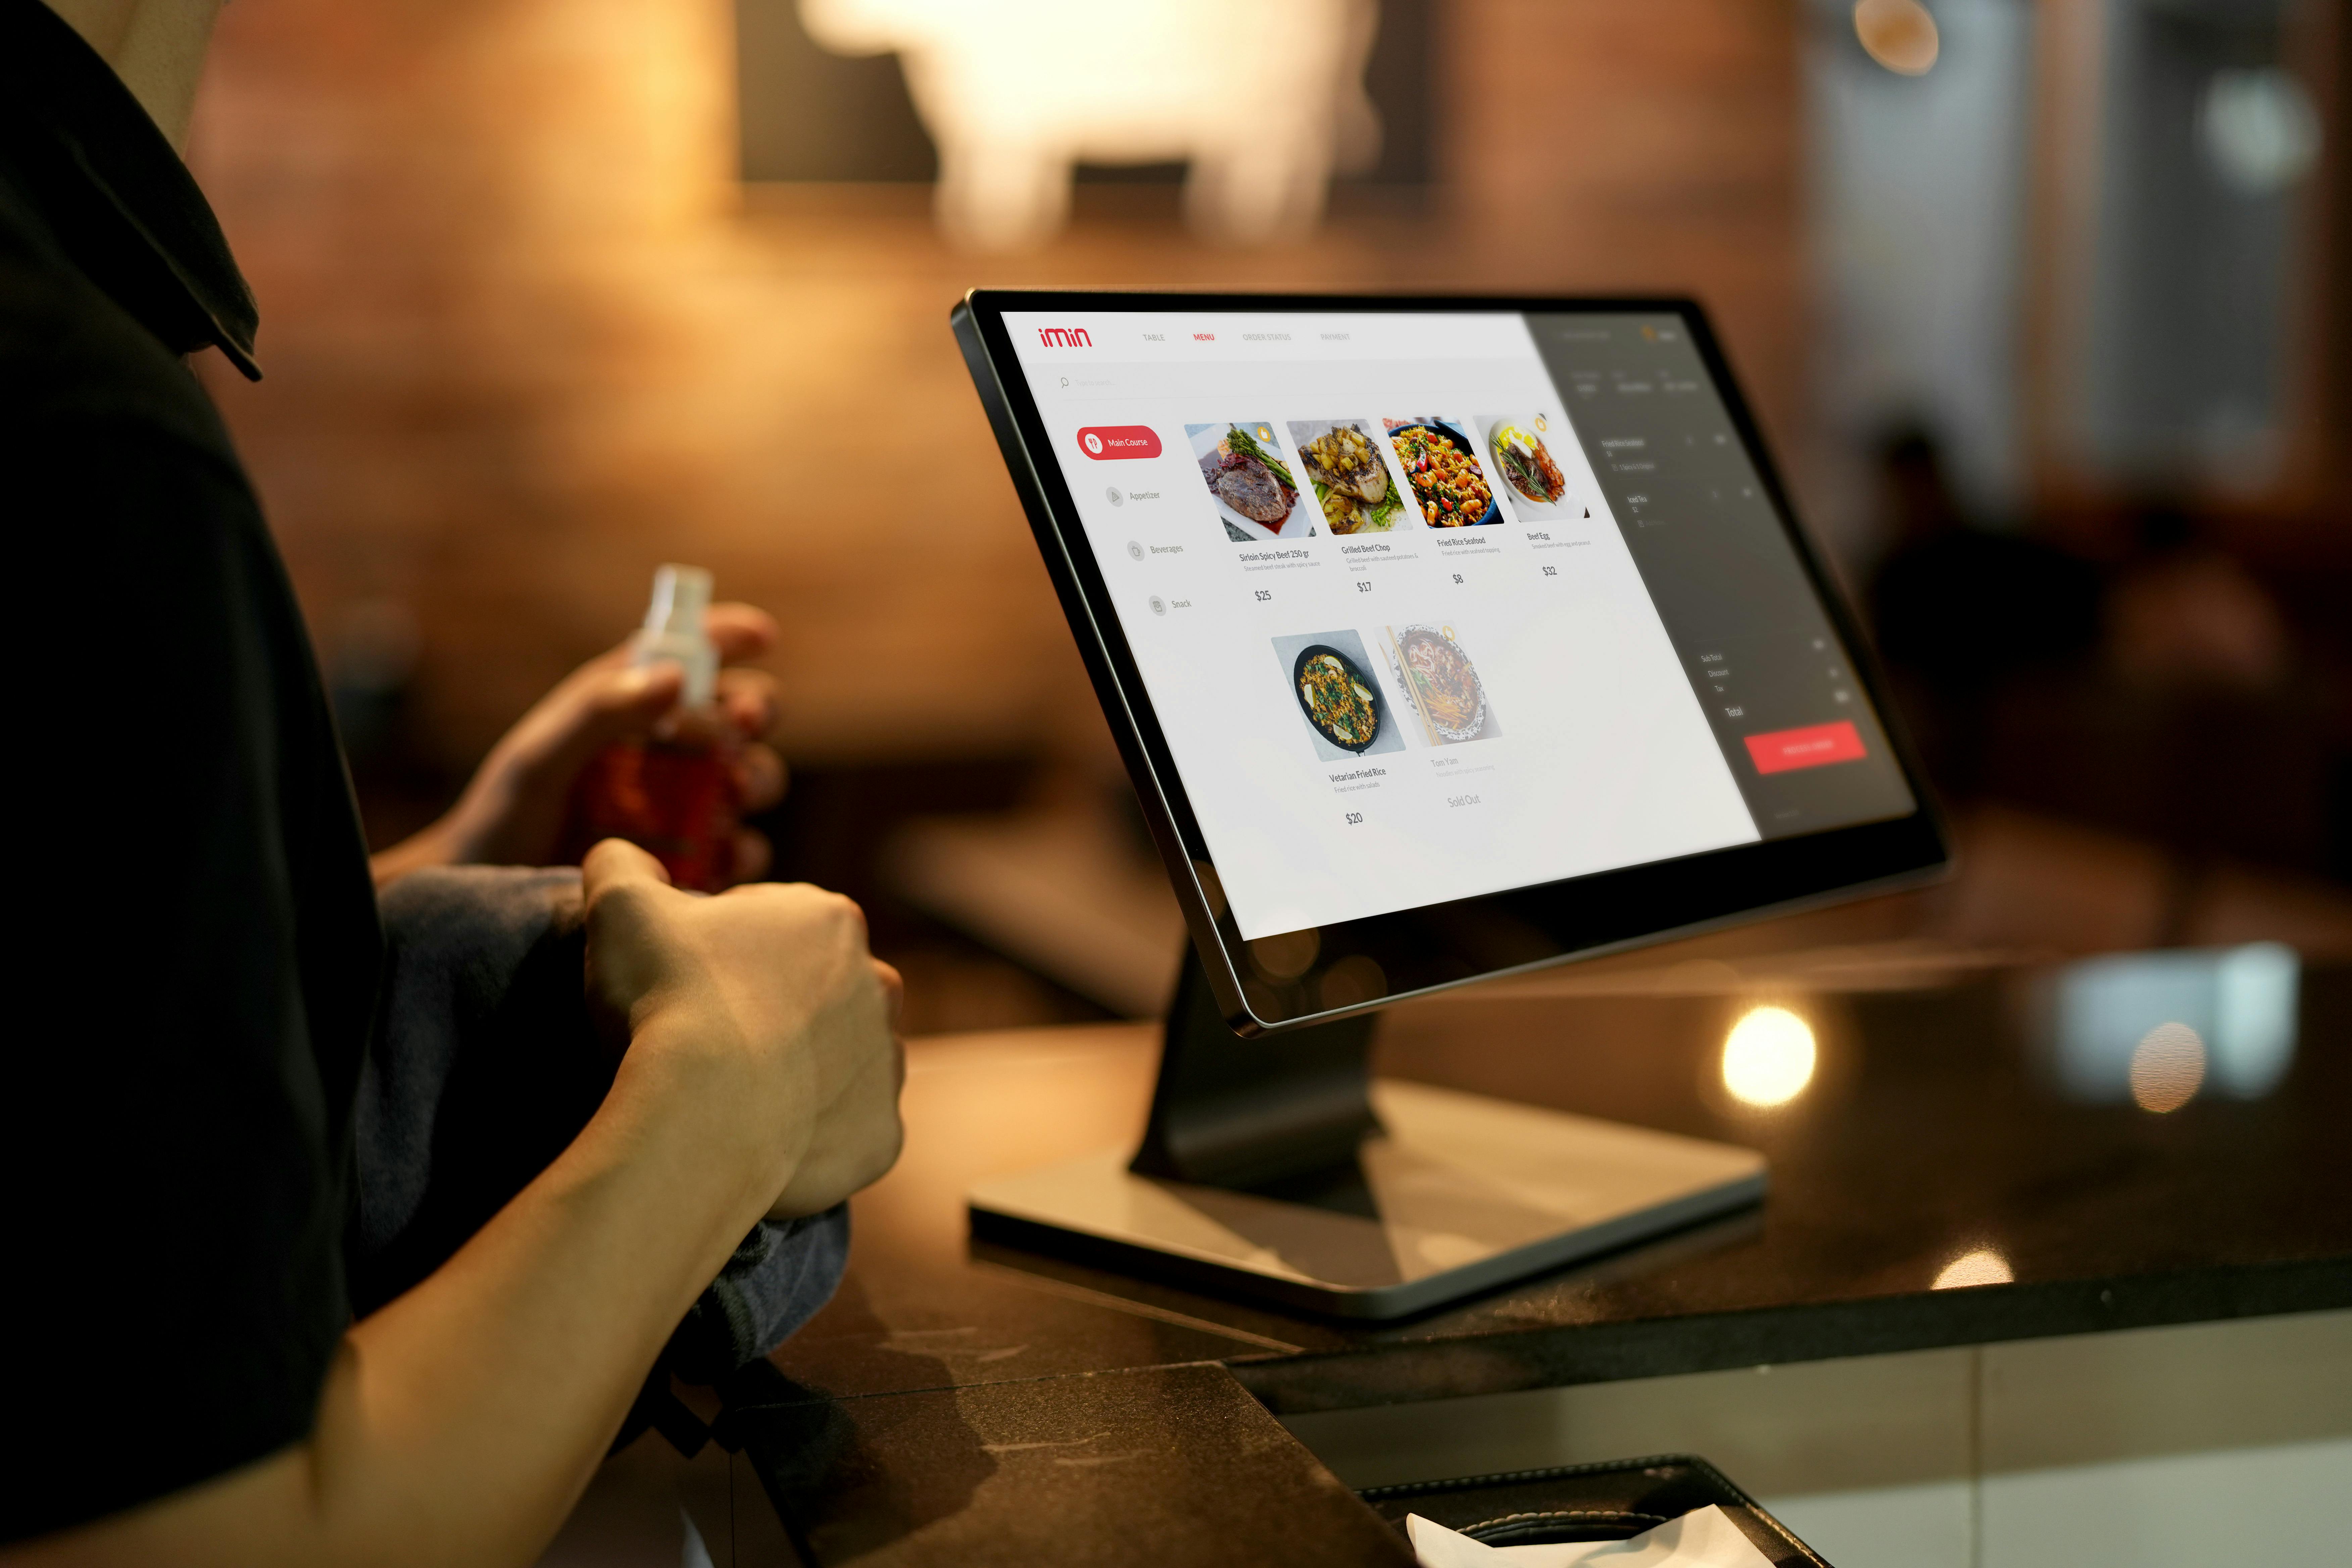 Touchscreen to Make Orders at Restaurant · Free Stock Photo